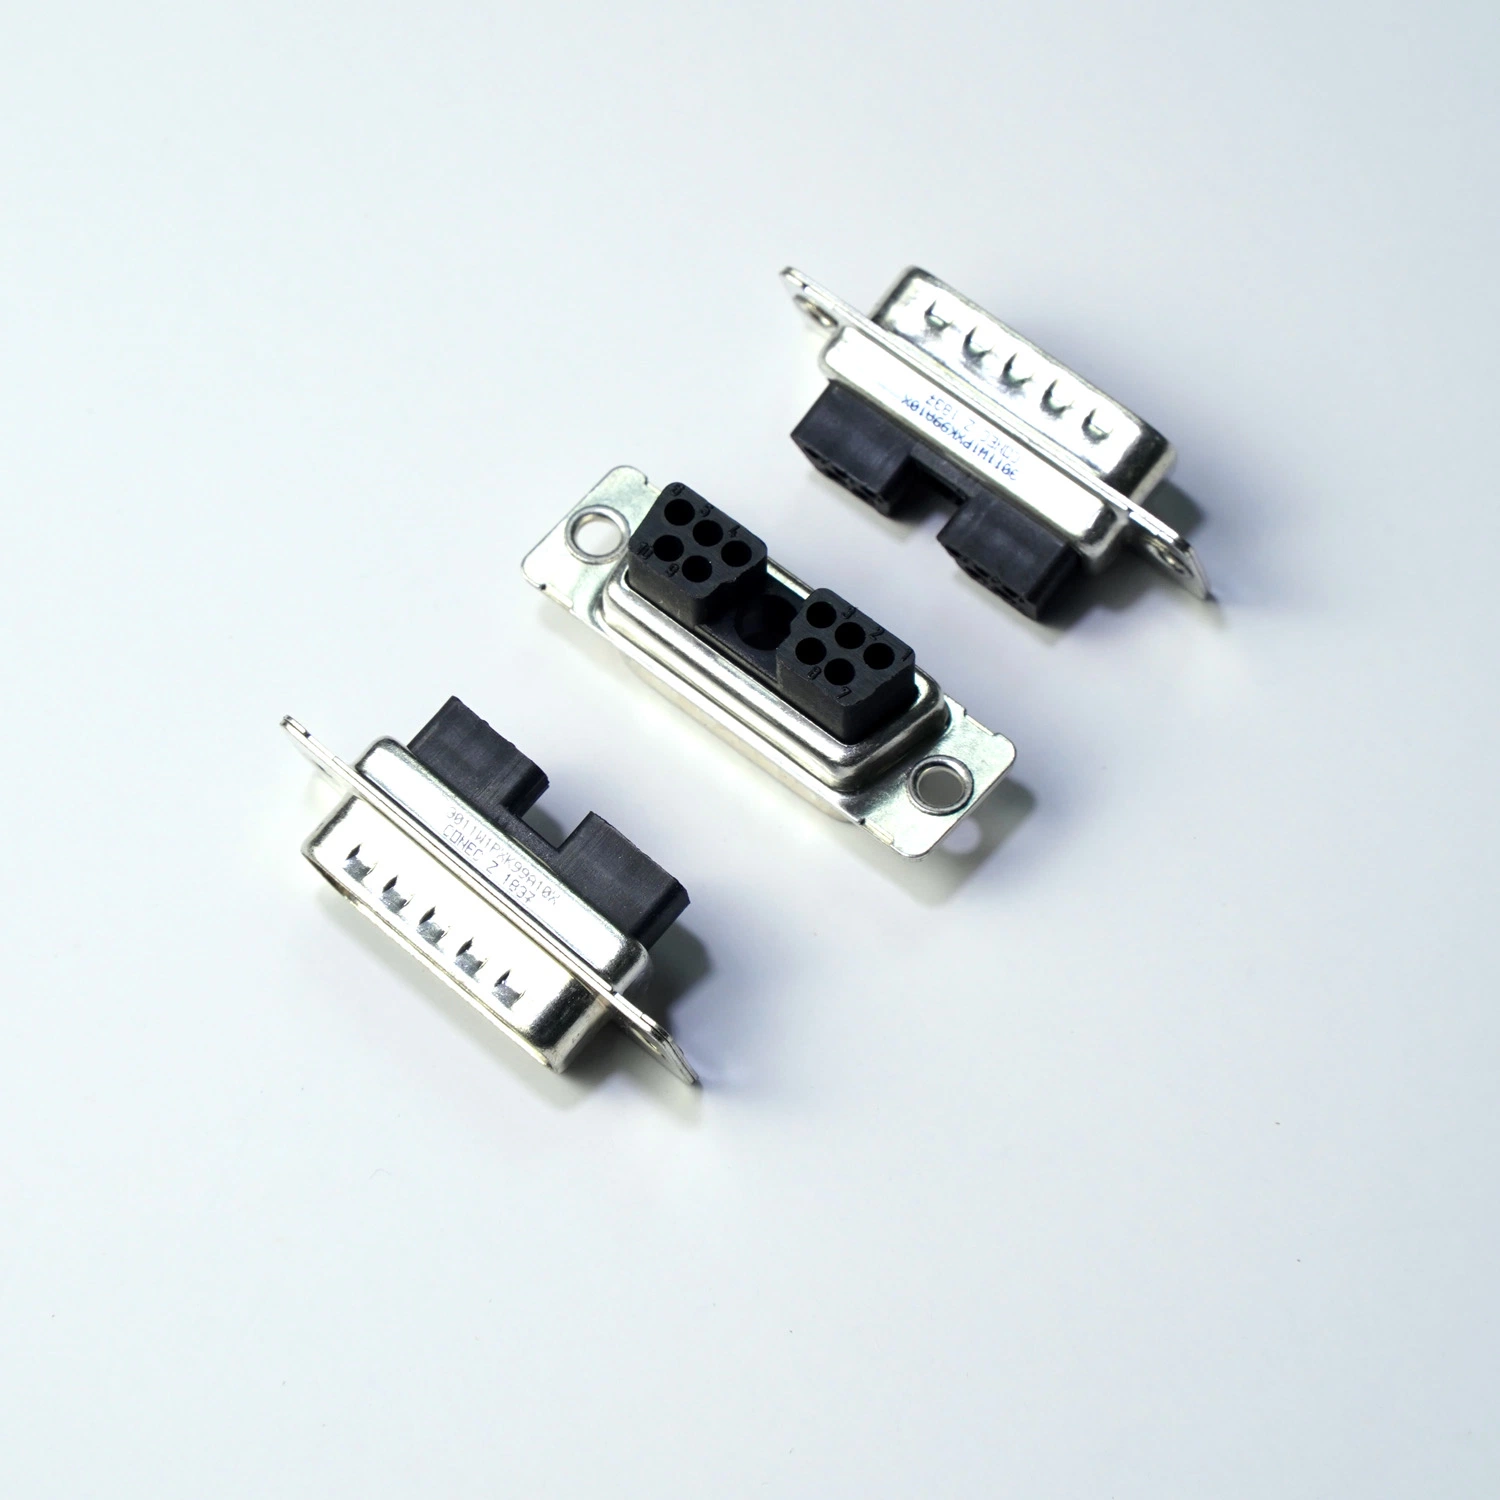 Conn Socket Electronic Connector of Hirose Df13-2630scf Df13-5s-1.25c Df50A-16s-1c Df3AA-3ep-2c Df52-5p-0.8c